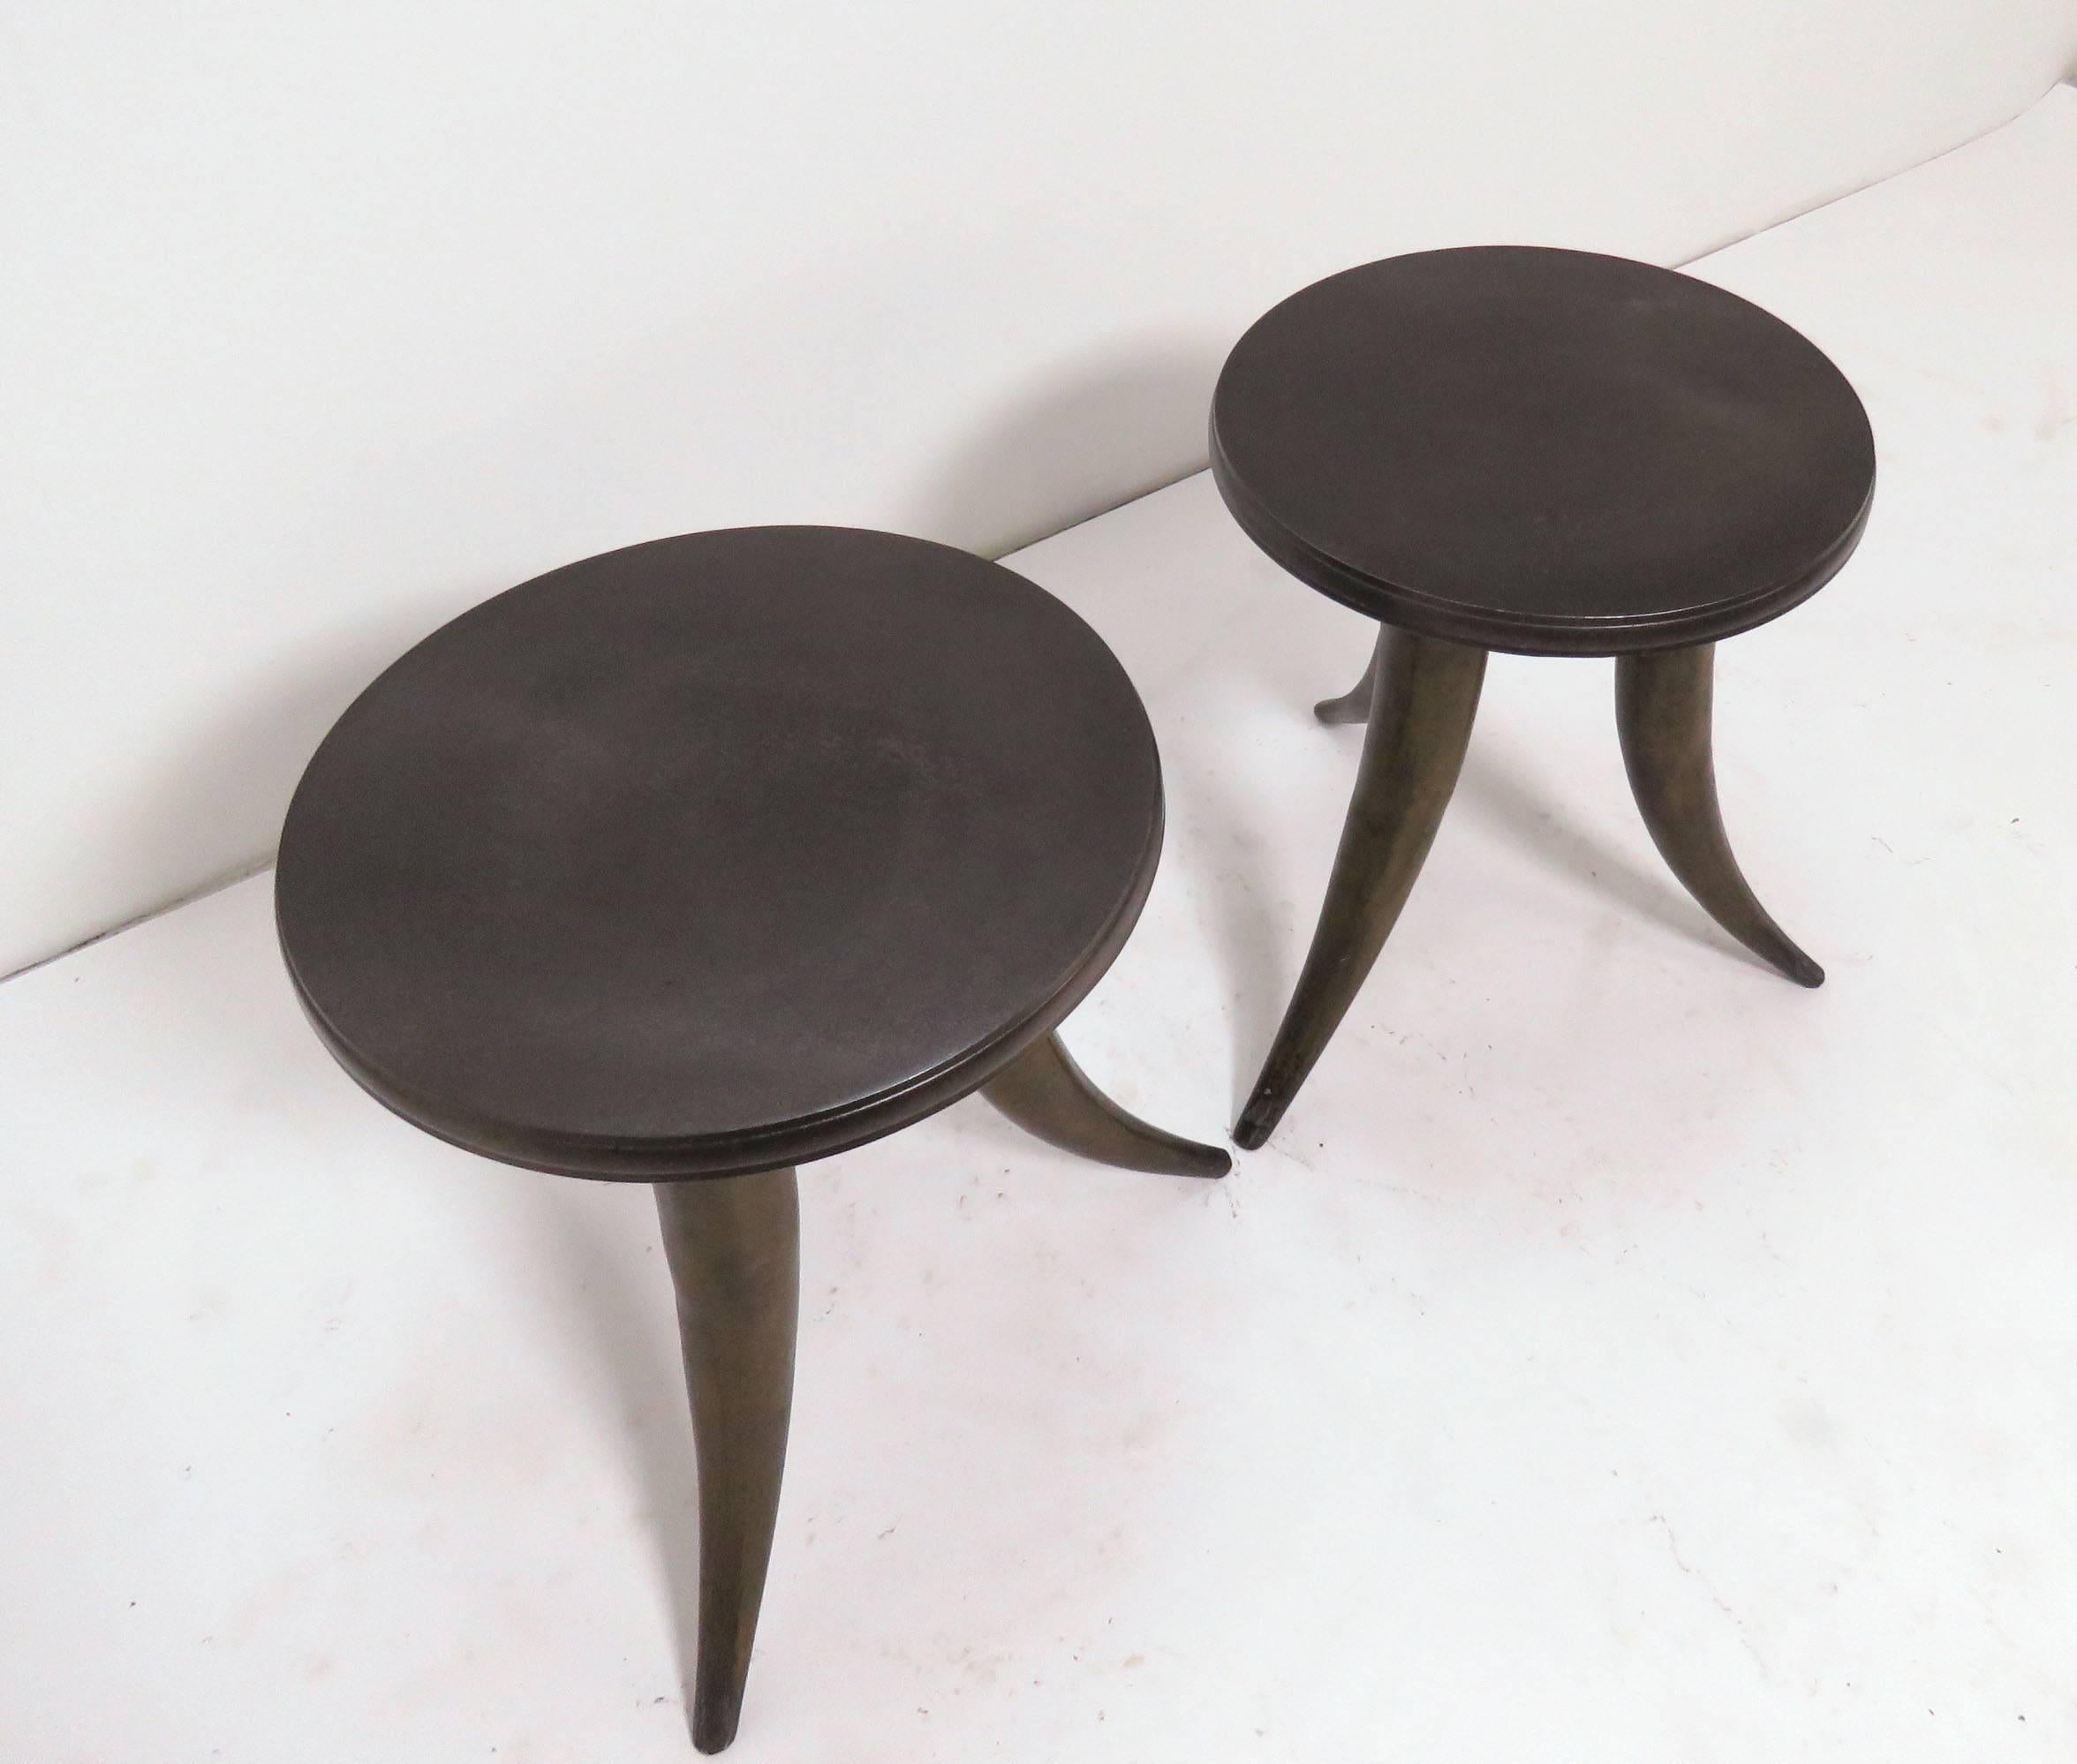 American Pair of Side Tables or Stools with Tusk Form Legs, circa 1960s